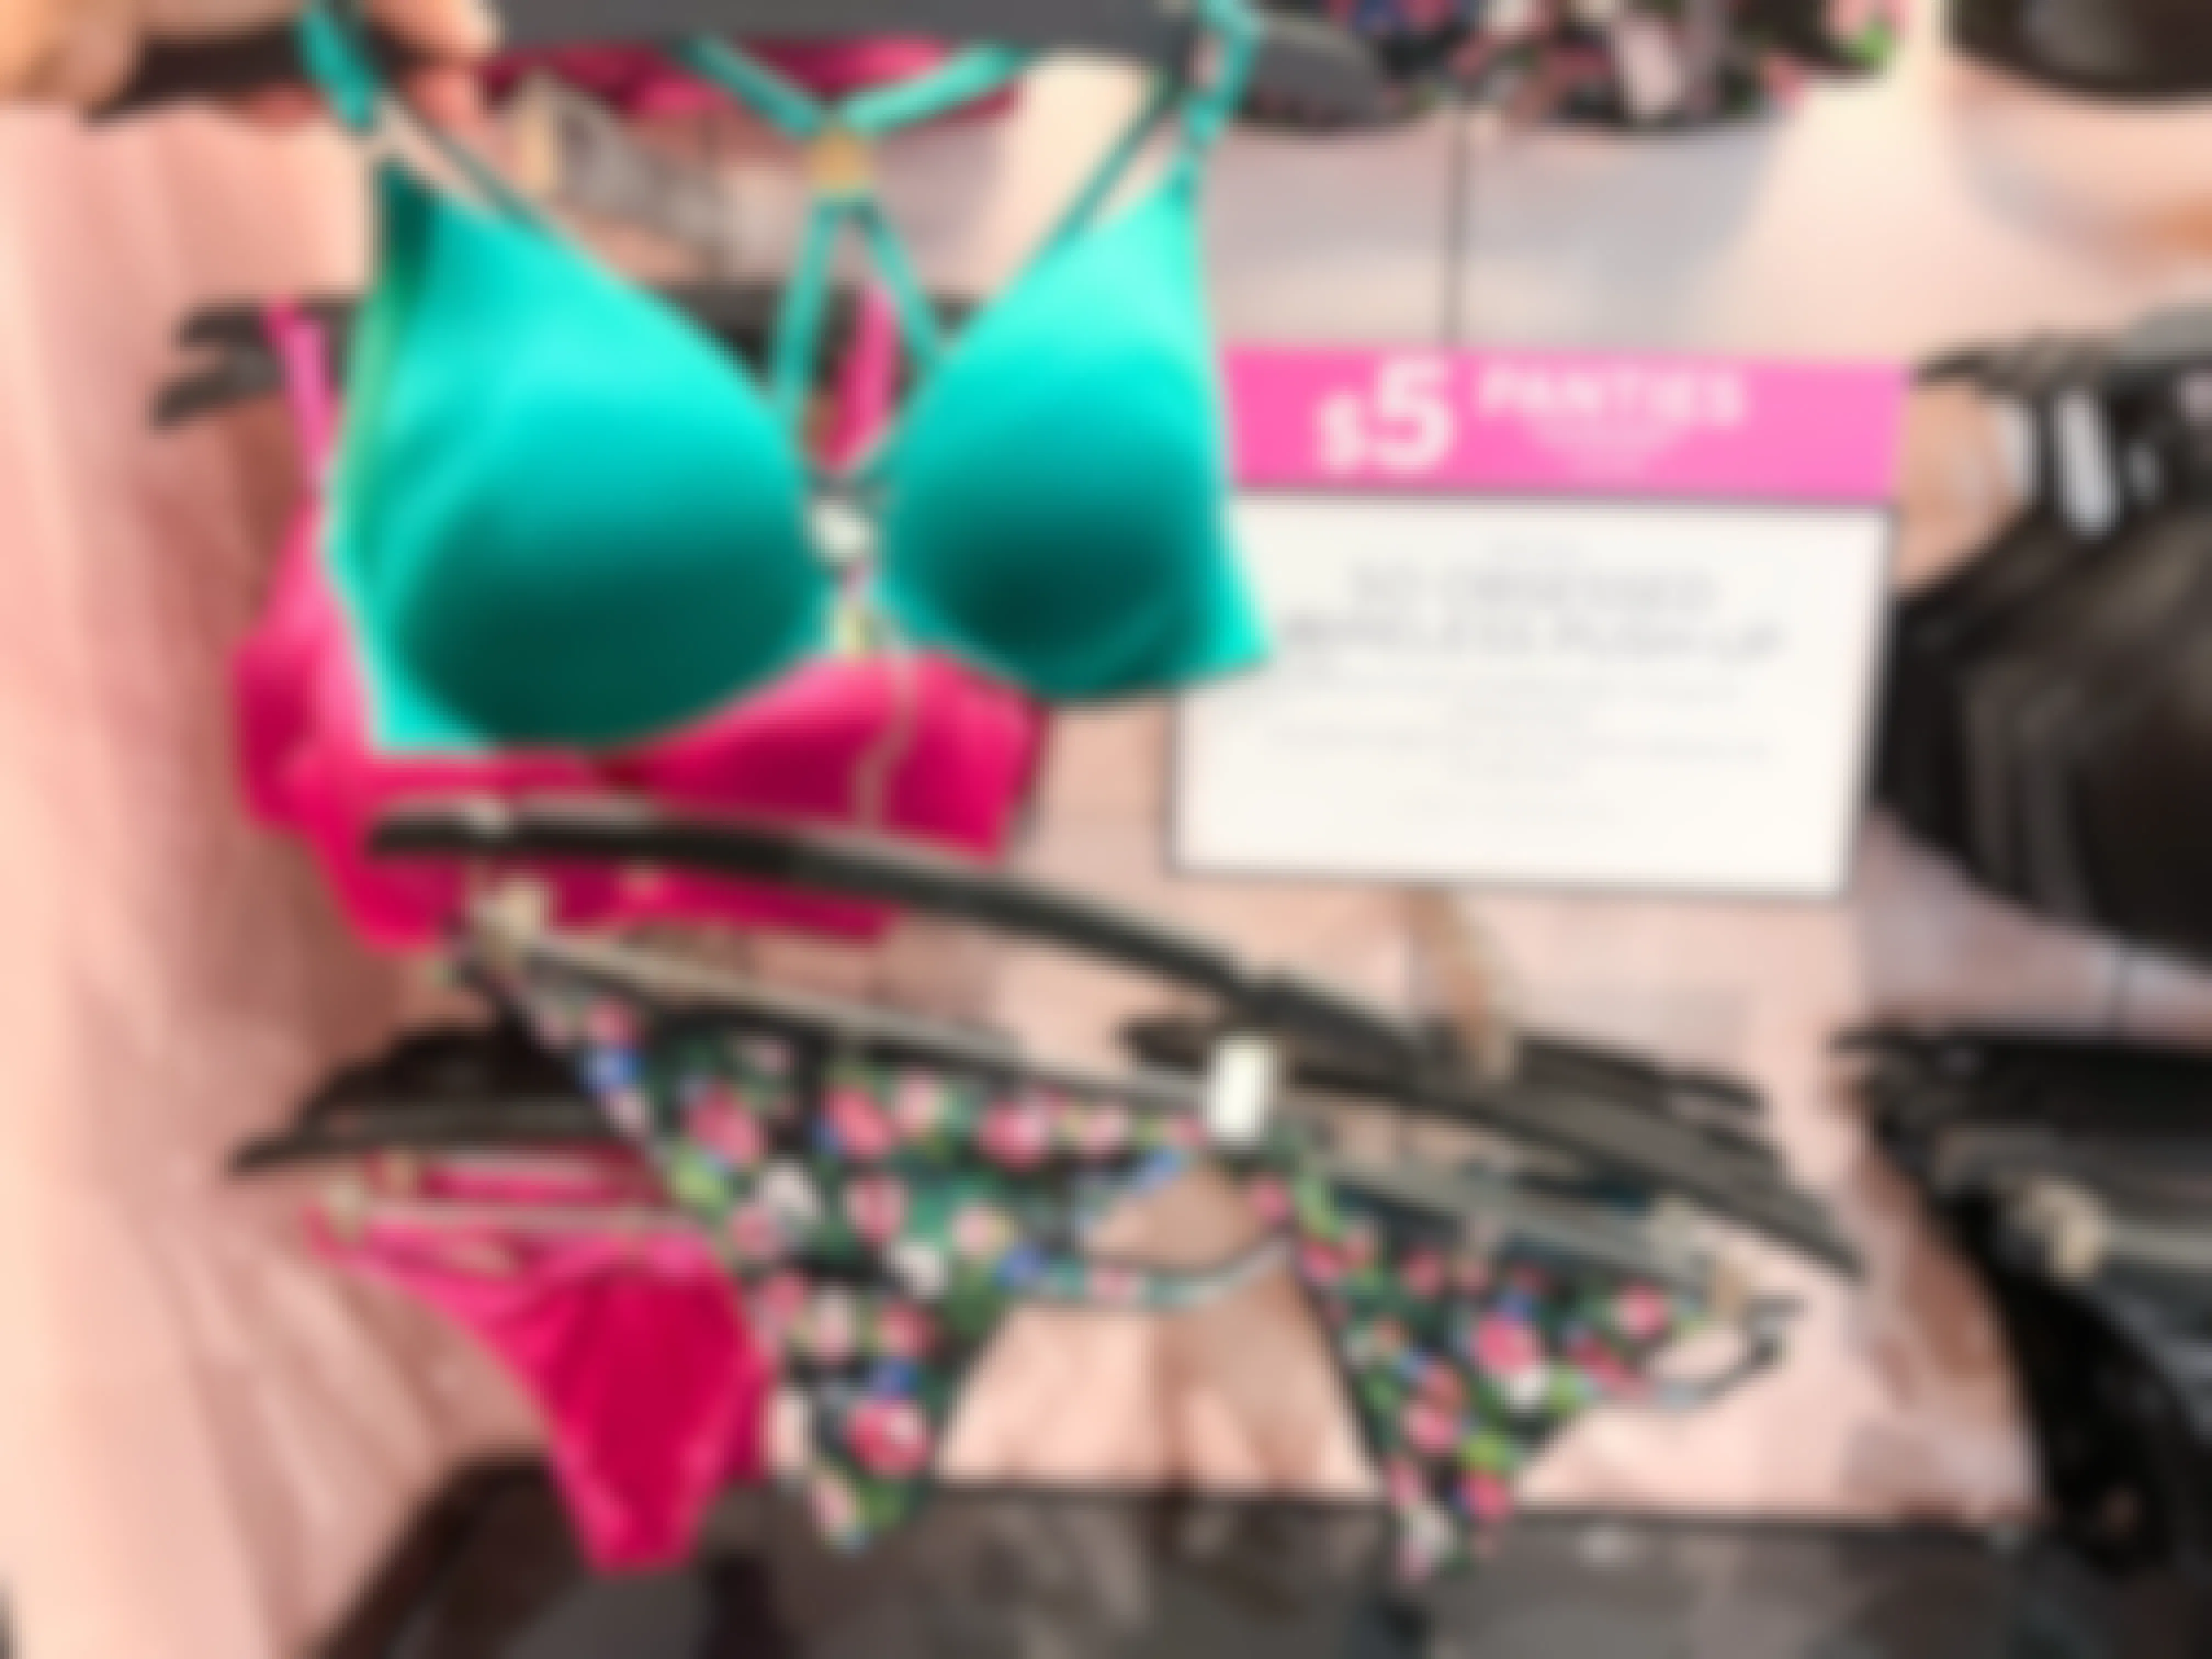 a green bra by a floral pair of panties by a sale sign